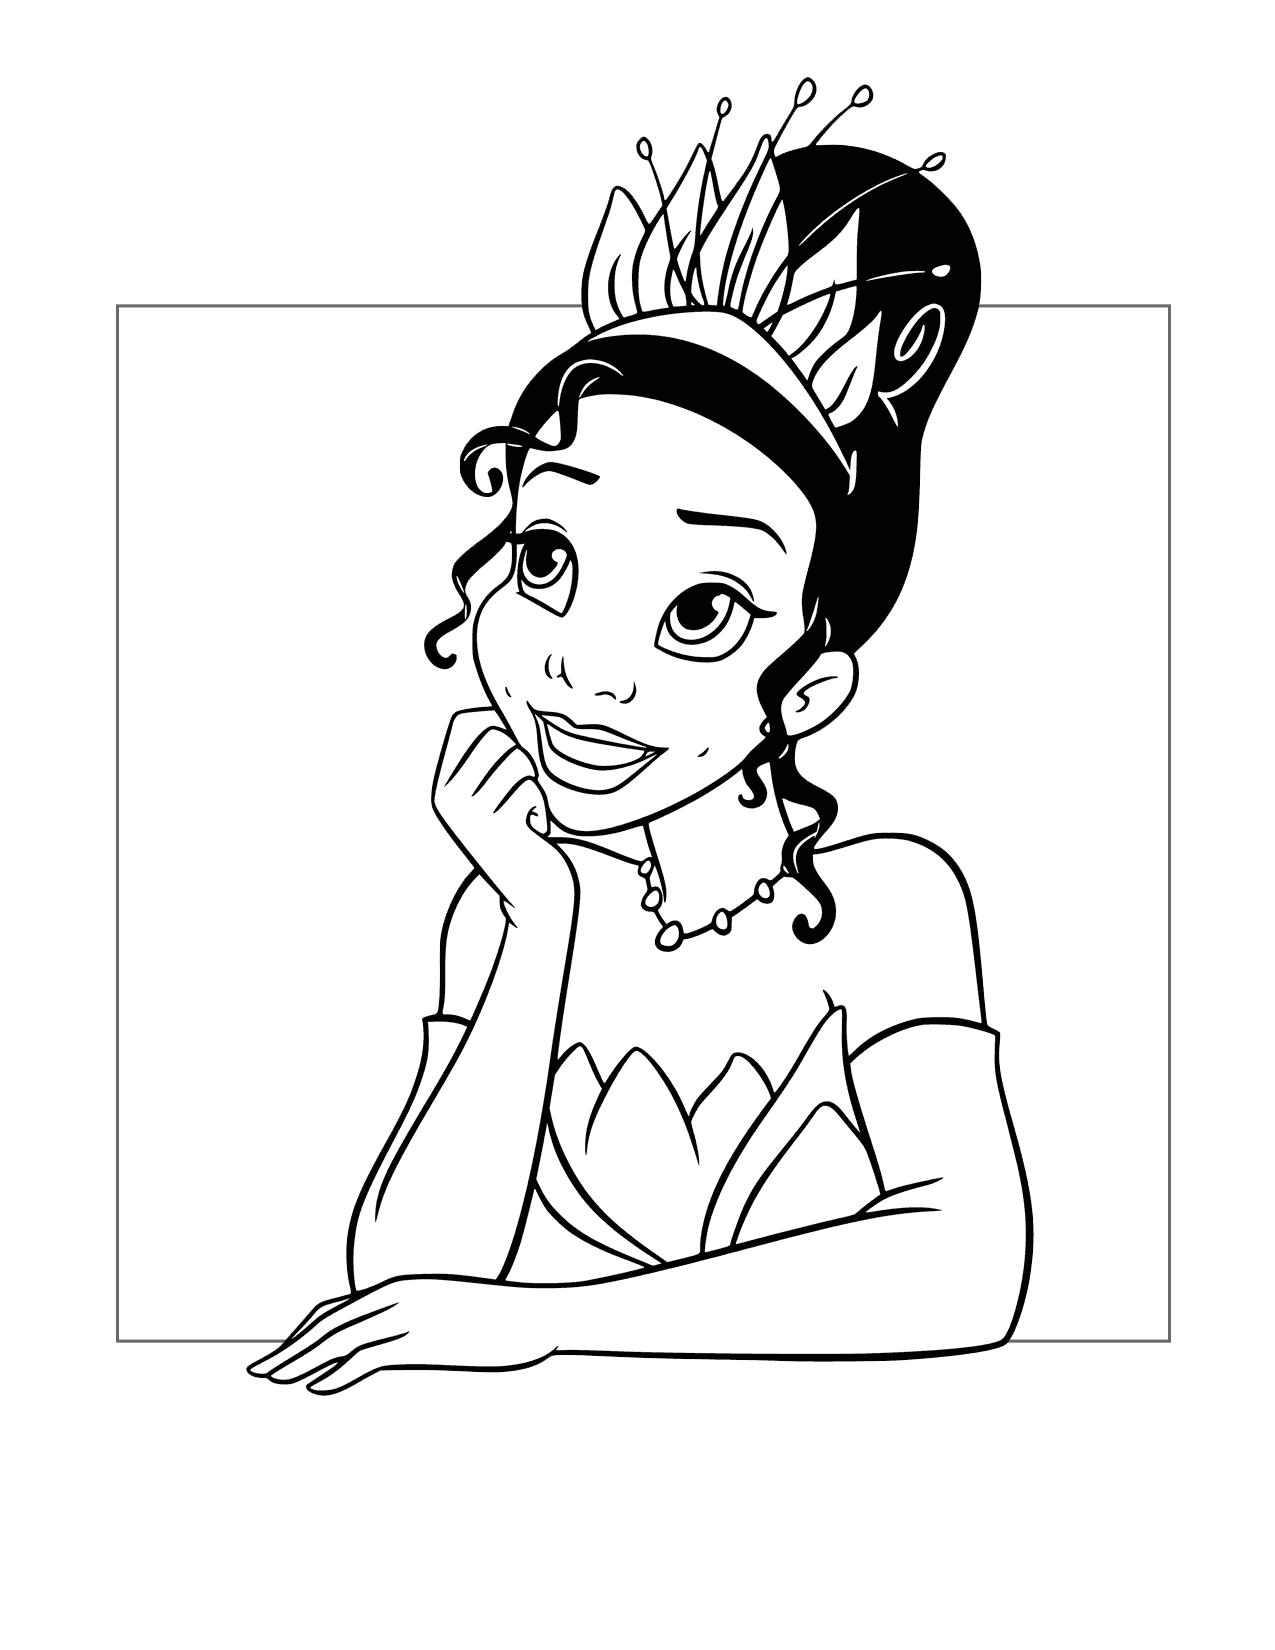 Tiana Thinks About Her Restuarant Coloring Page